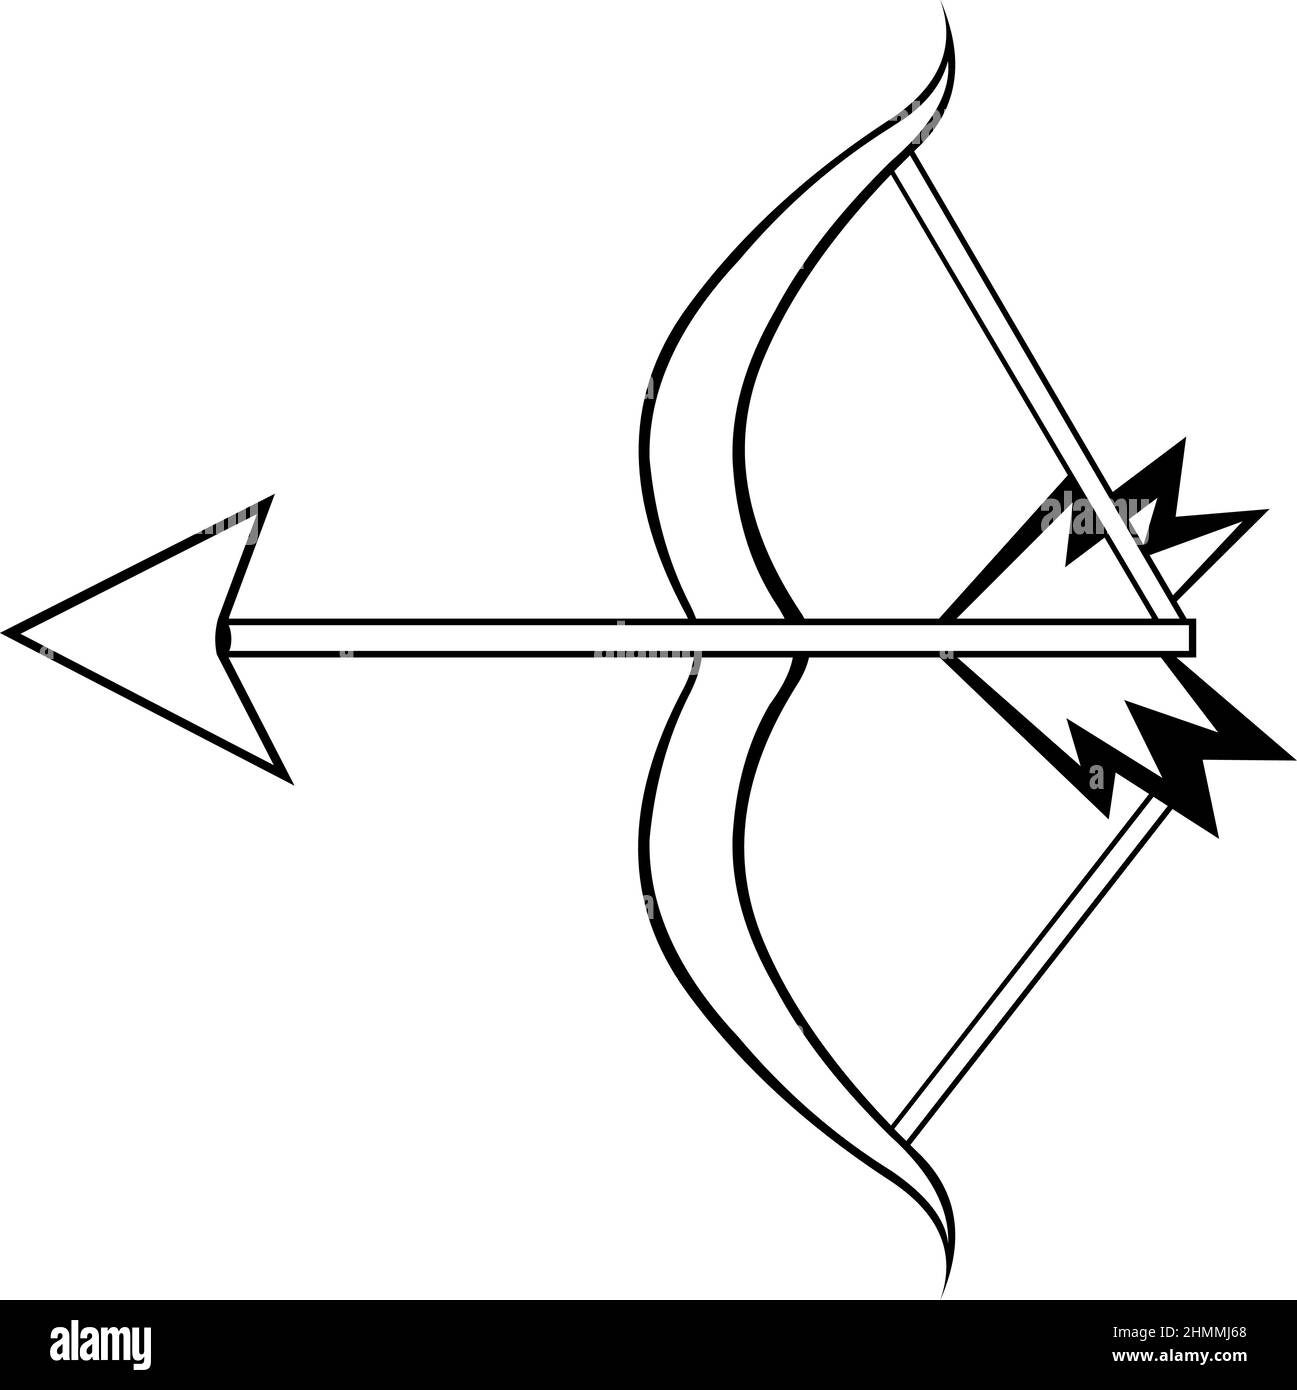 Vector illustration of a bow and arrow drawn in black and white Stock Vector